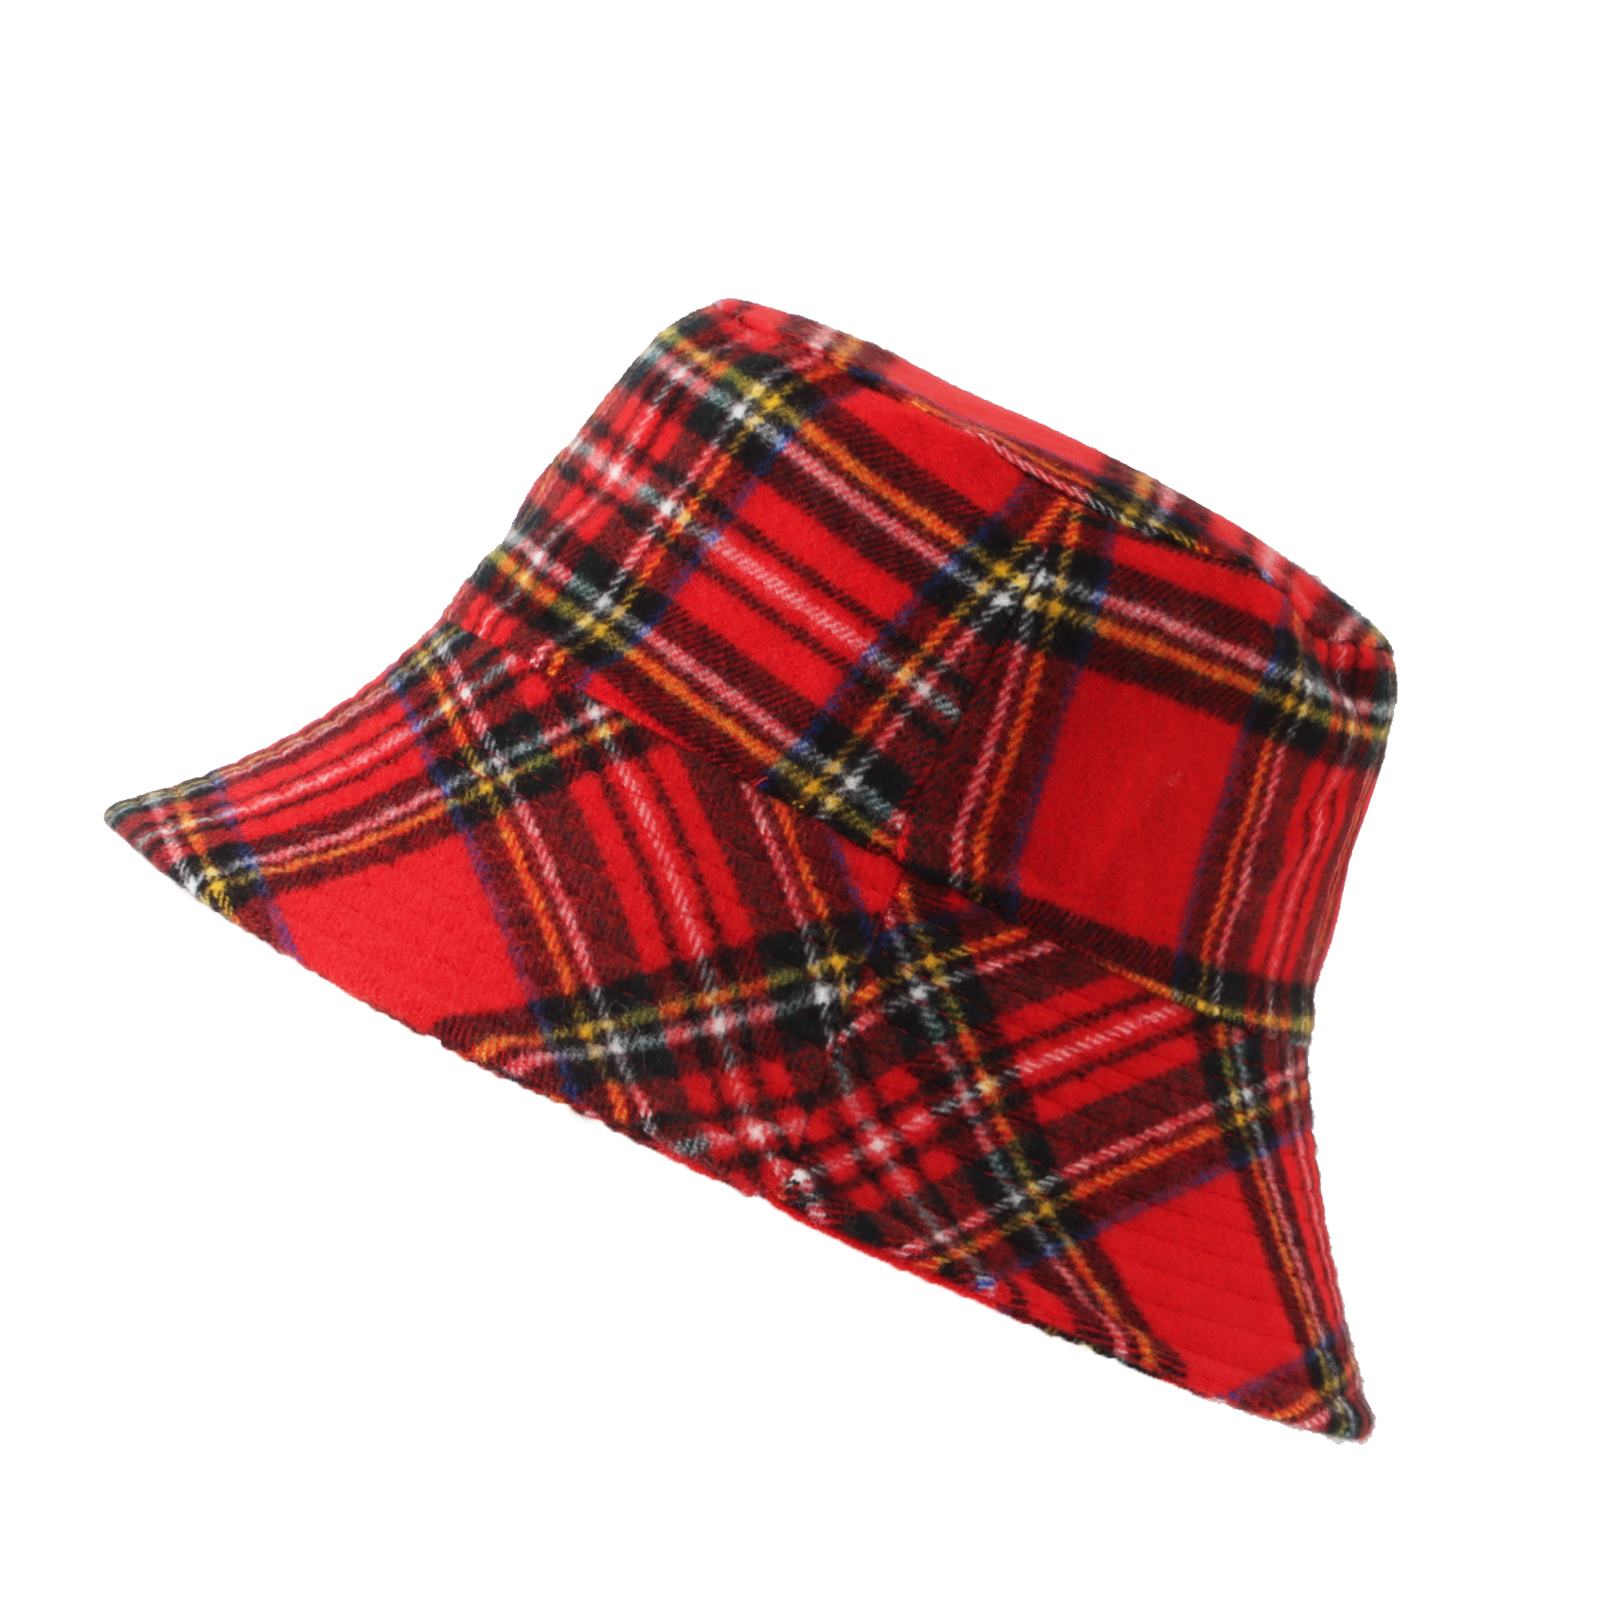 WITHMOONS Polyester Plaid Tartan Bucket Fedora Hat Winter Check Cap HMB1299 (Red) - image 3 of 5